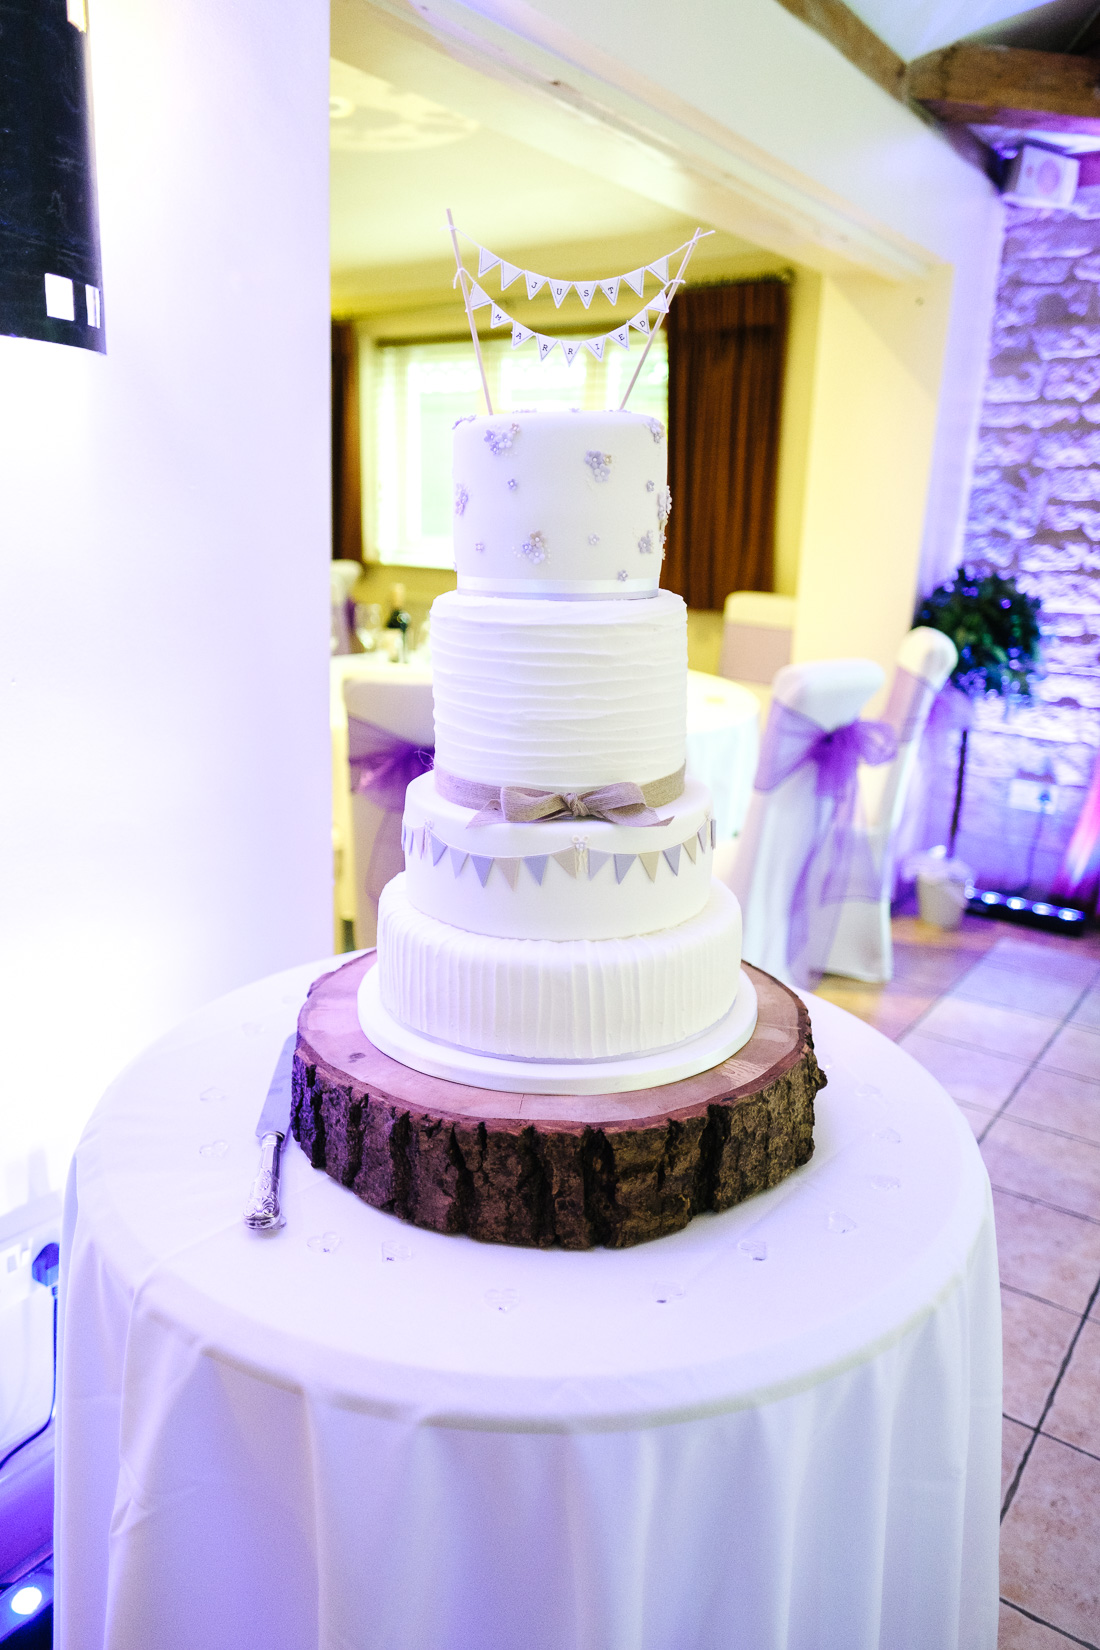  The wedding of Zoe and Dan Martindale, at the Tally Ho Hotel, Bicester 